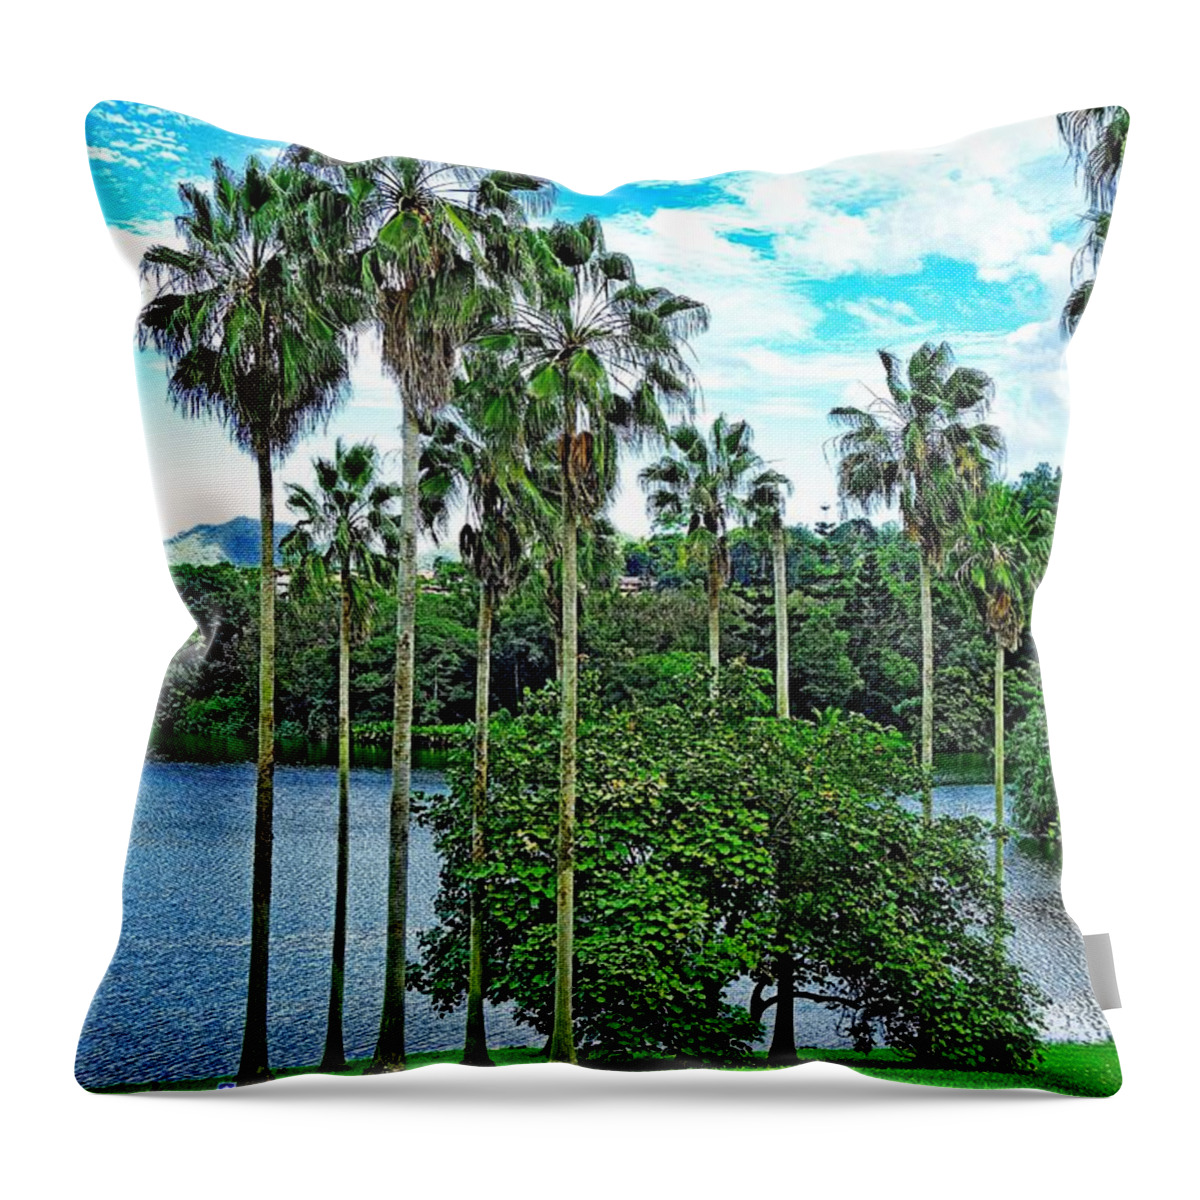 Waokele Pond Throw Pillow featuring the photograph Waokele Pond Palms and Sky by Robert Meyers-Lussier